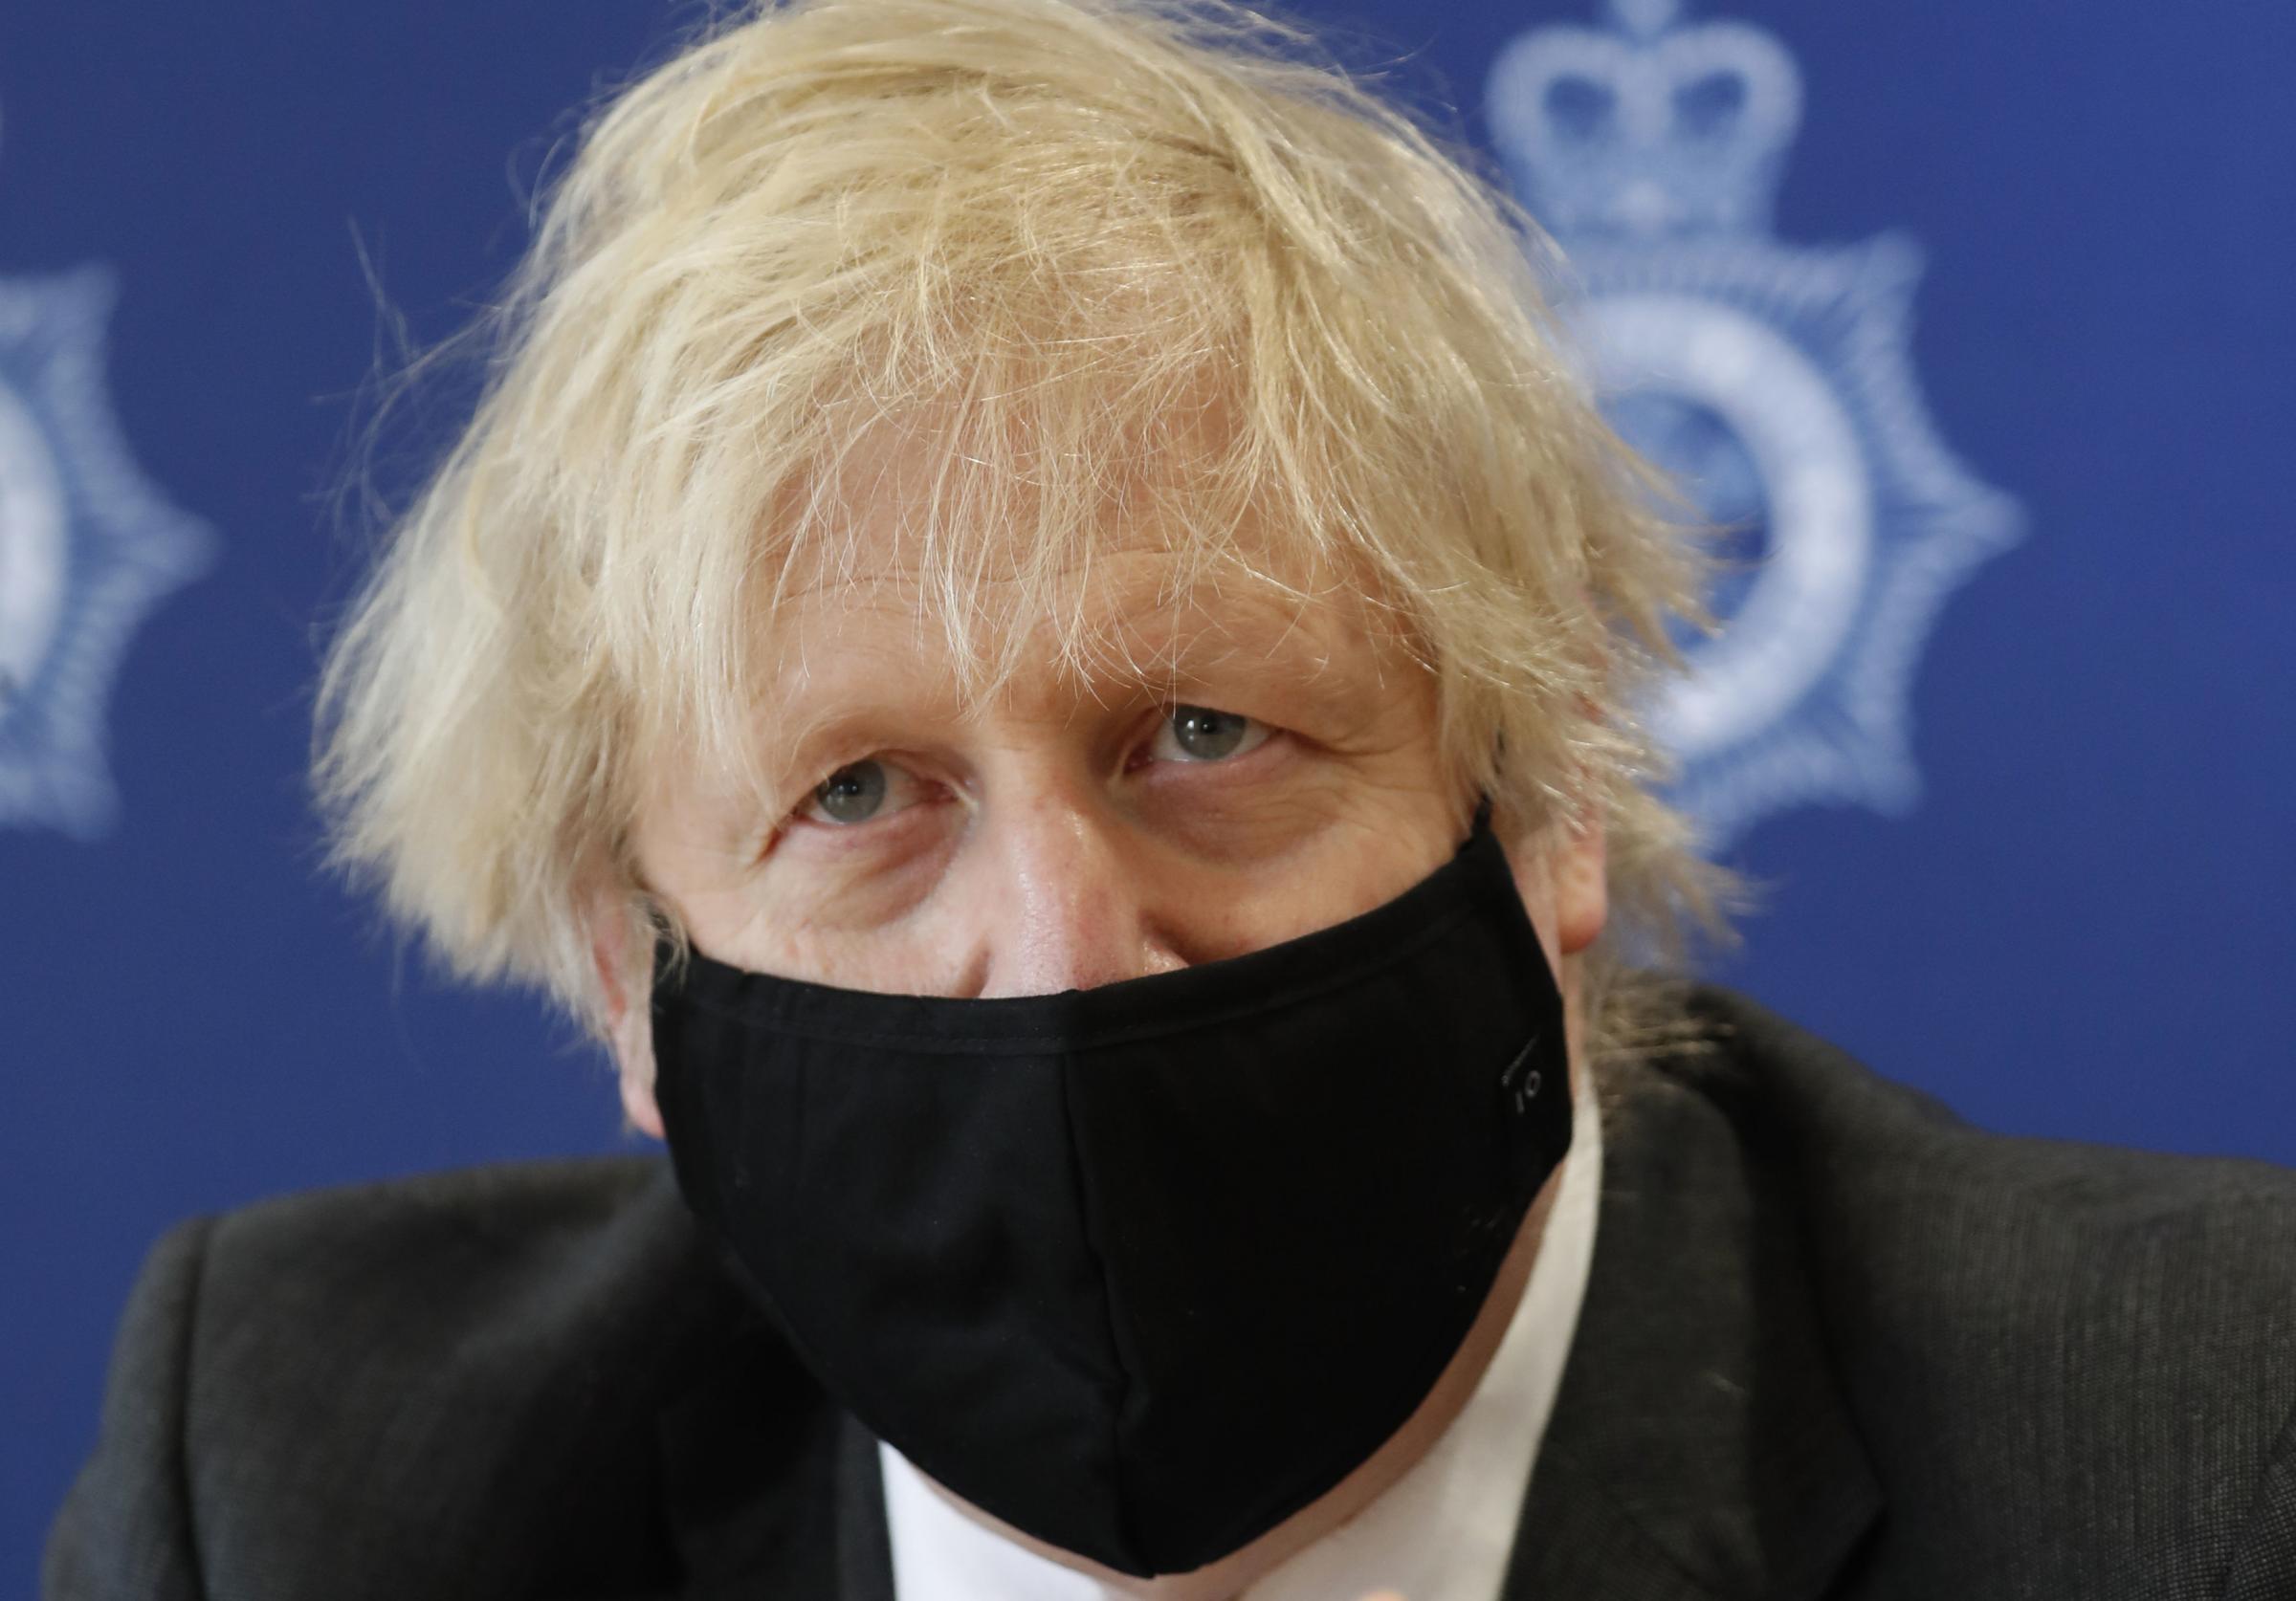 Prime minister Boris Johnson during a visit to South Wales Police Headquarters in Bridgend. Picture date: Wednesday February 17, 2021. PA Photo. See PA story HEALTH Coronavirus. Photo credit should read: Alastair Grant/PA Wire.